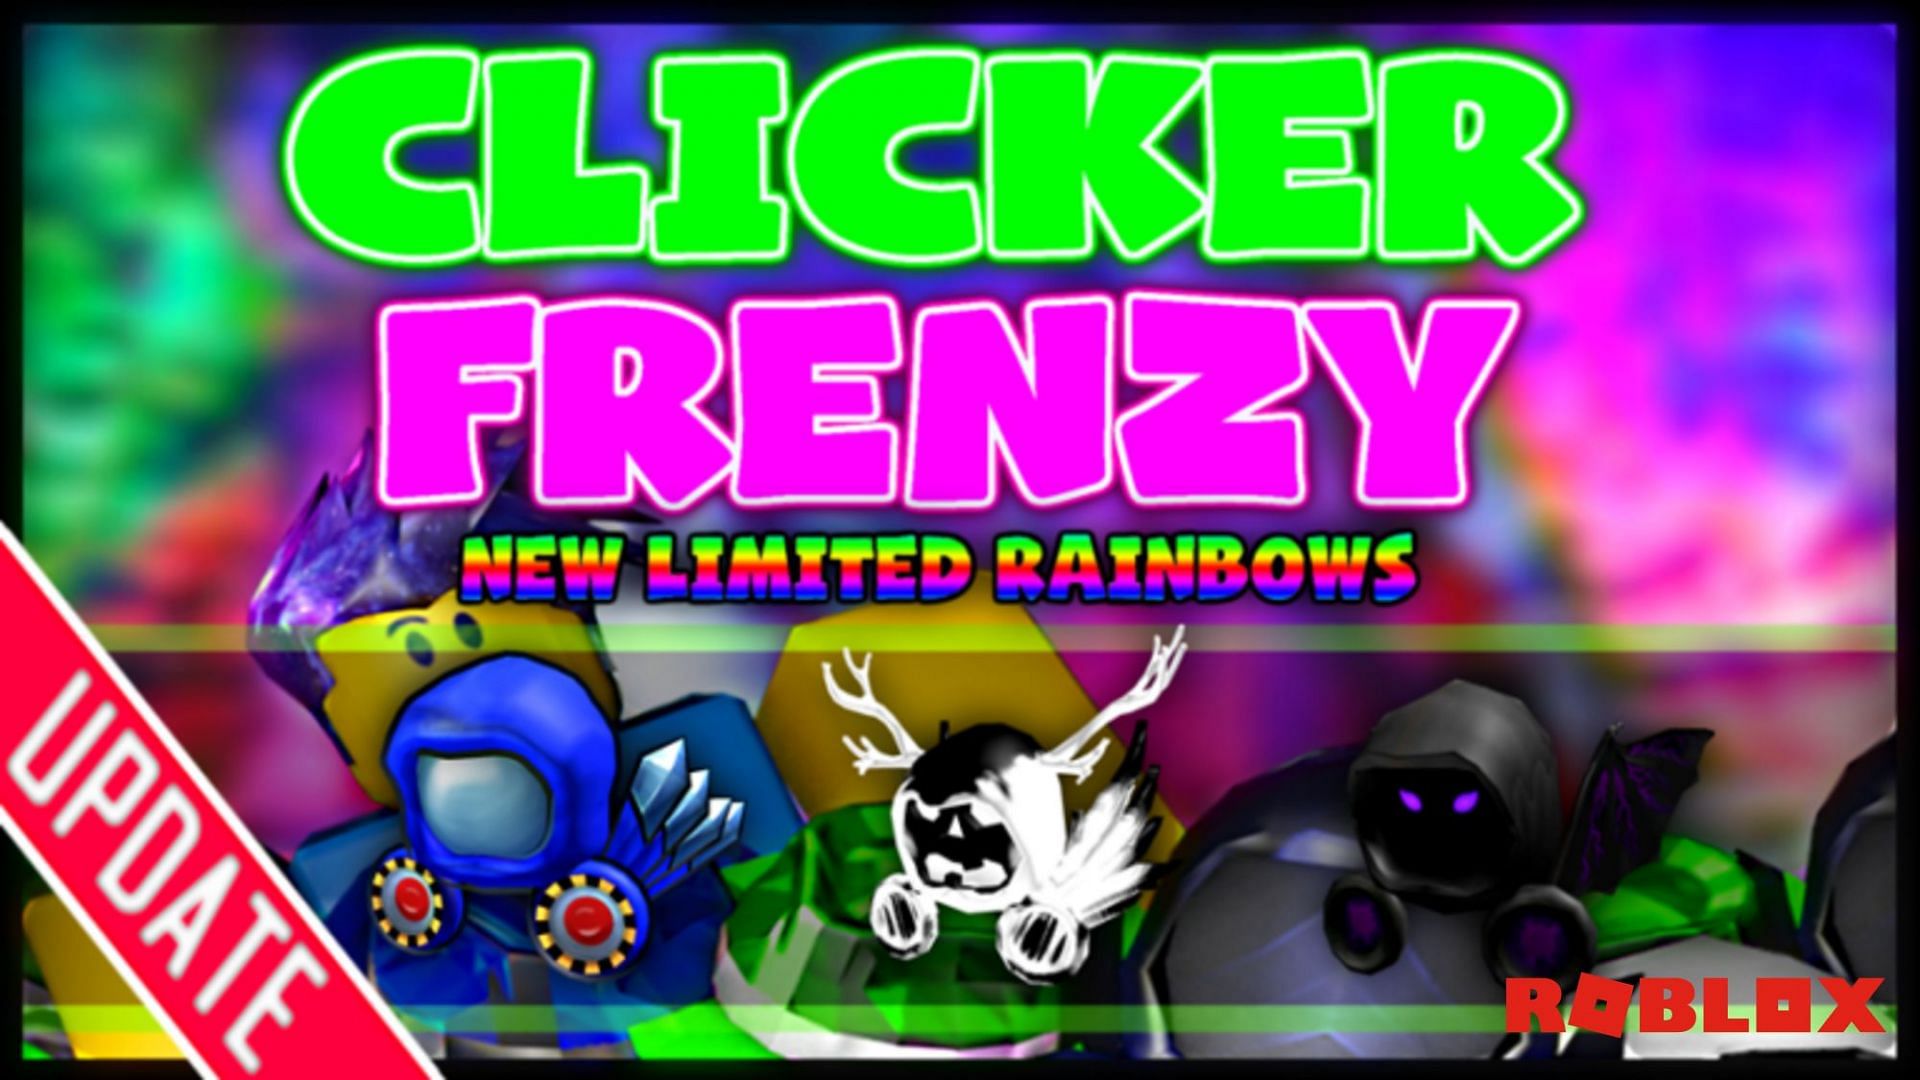 Codes to redeem free rewards in Roblox Clicker Frenzy (Image via Roblox)